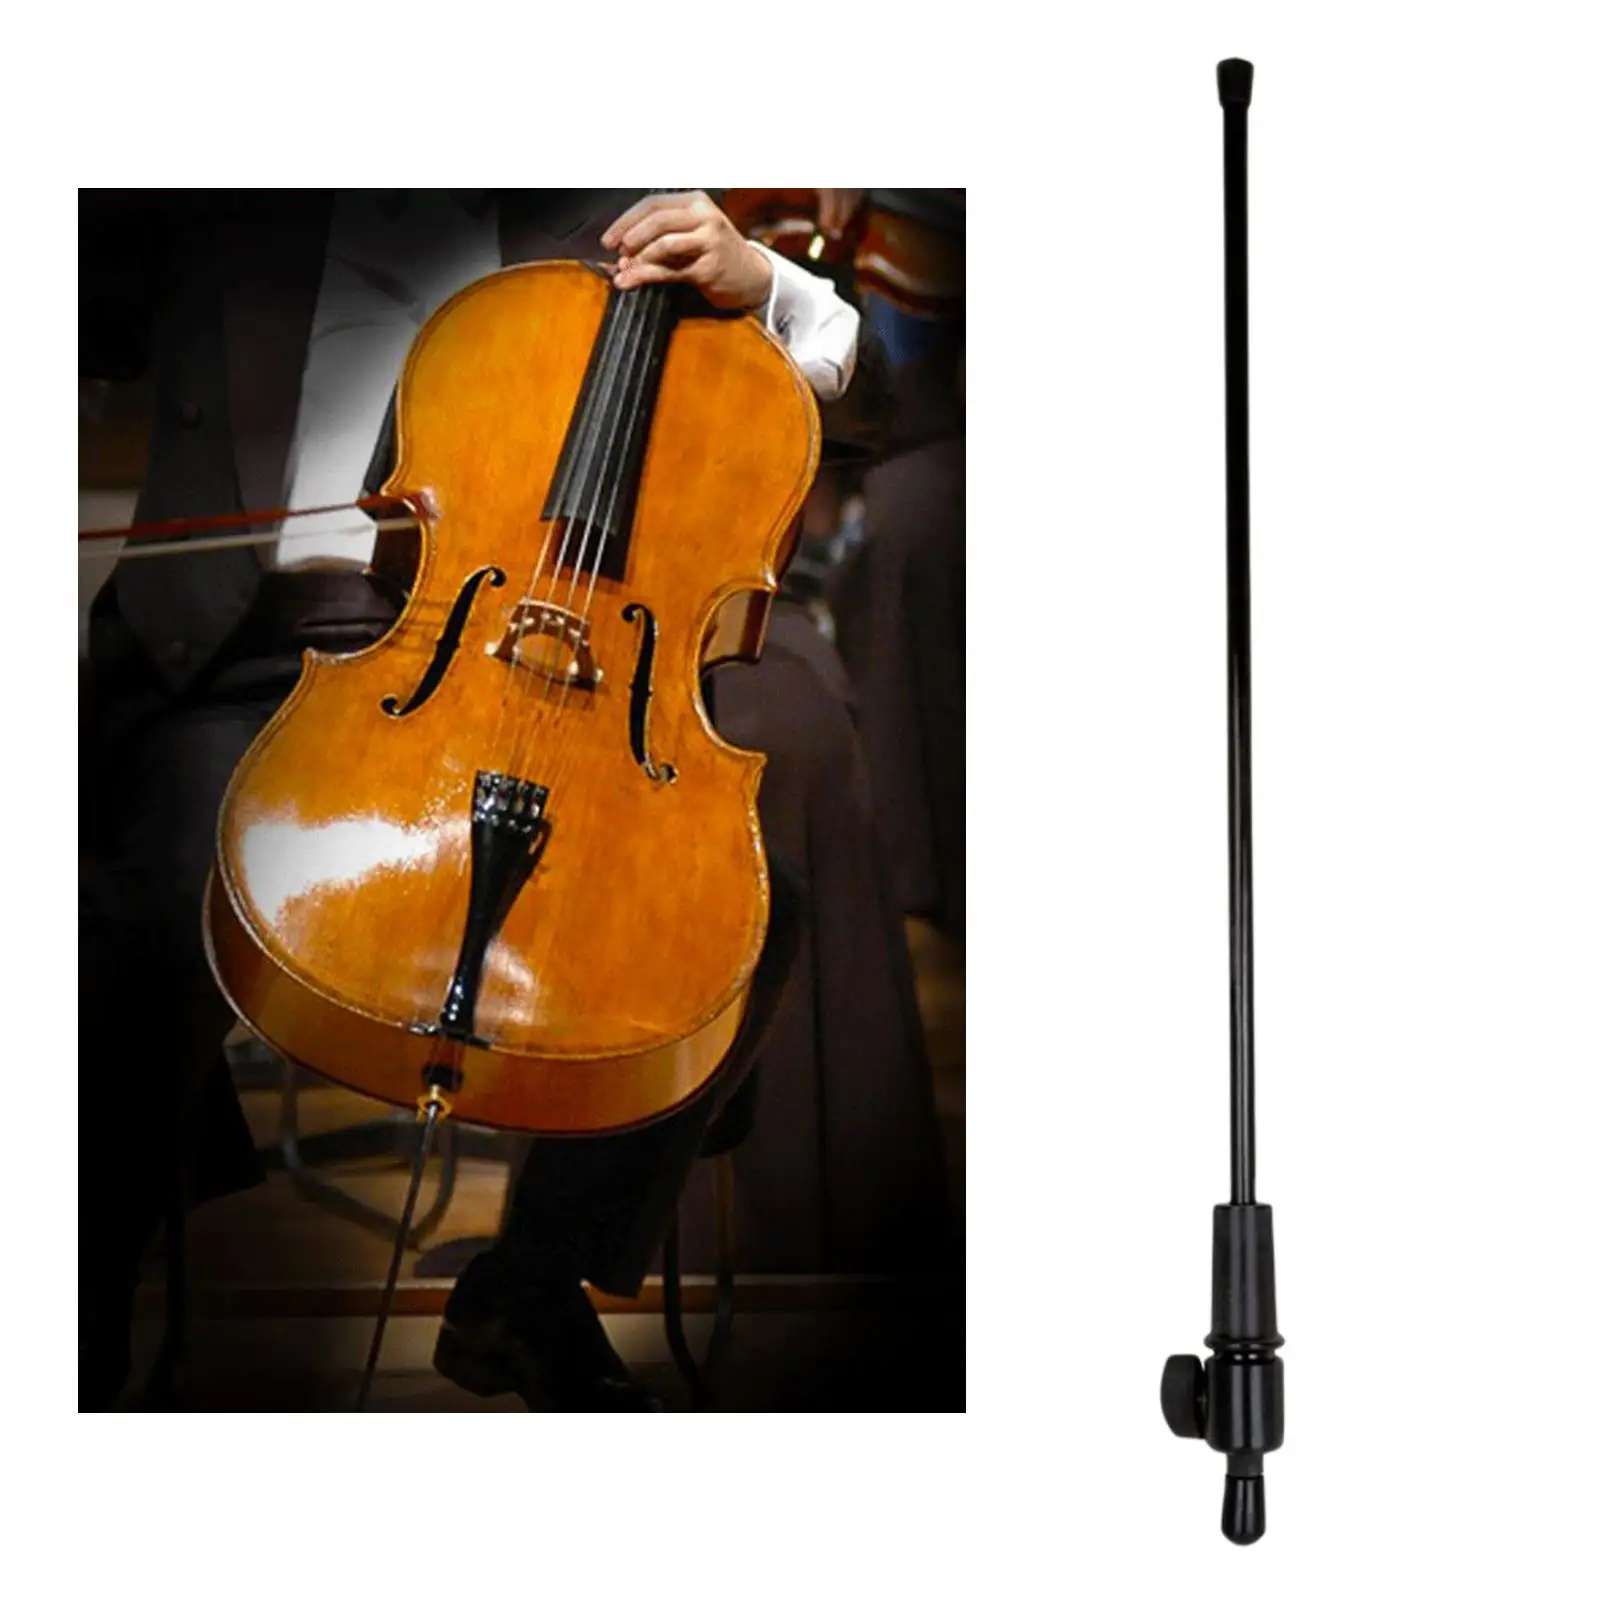 Professional Cello Endpin Replace Parts Accessory Musical Instrument for Teens Kids Beginners Adults Musicians